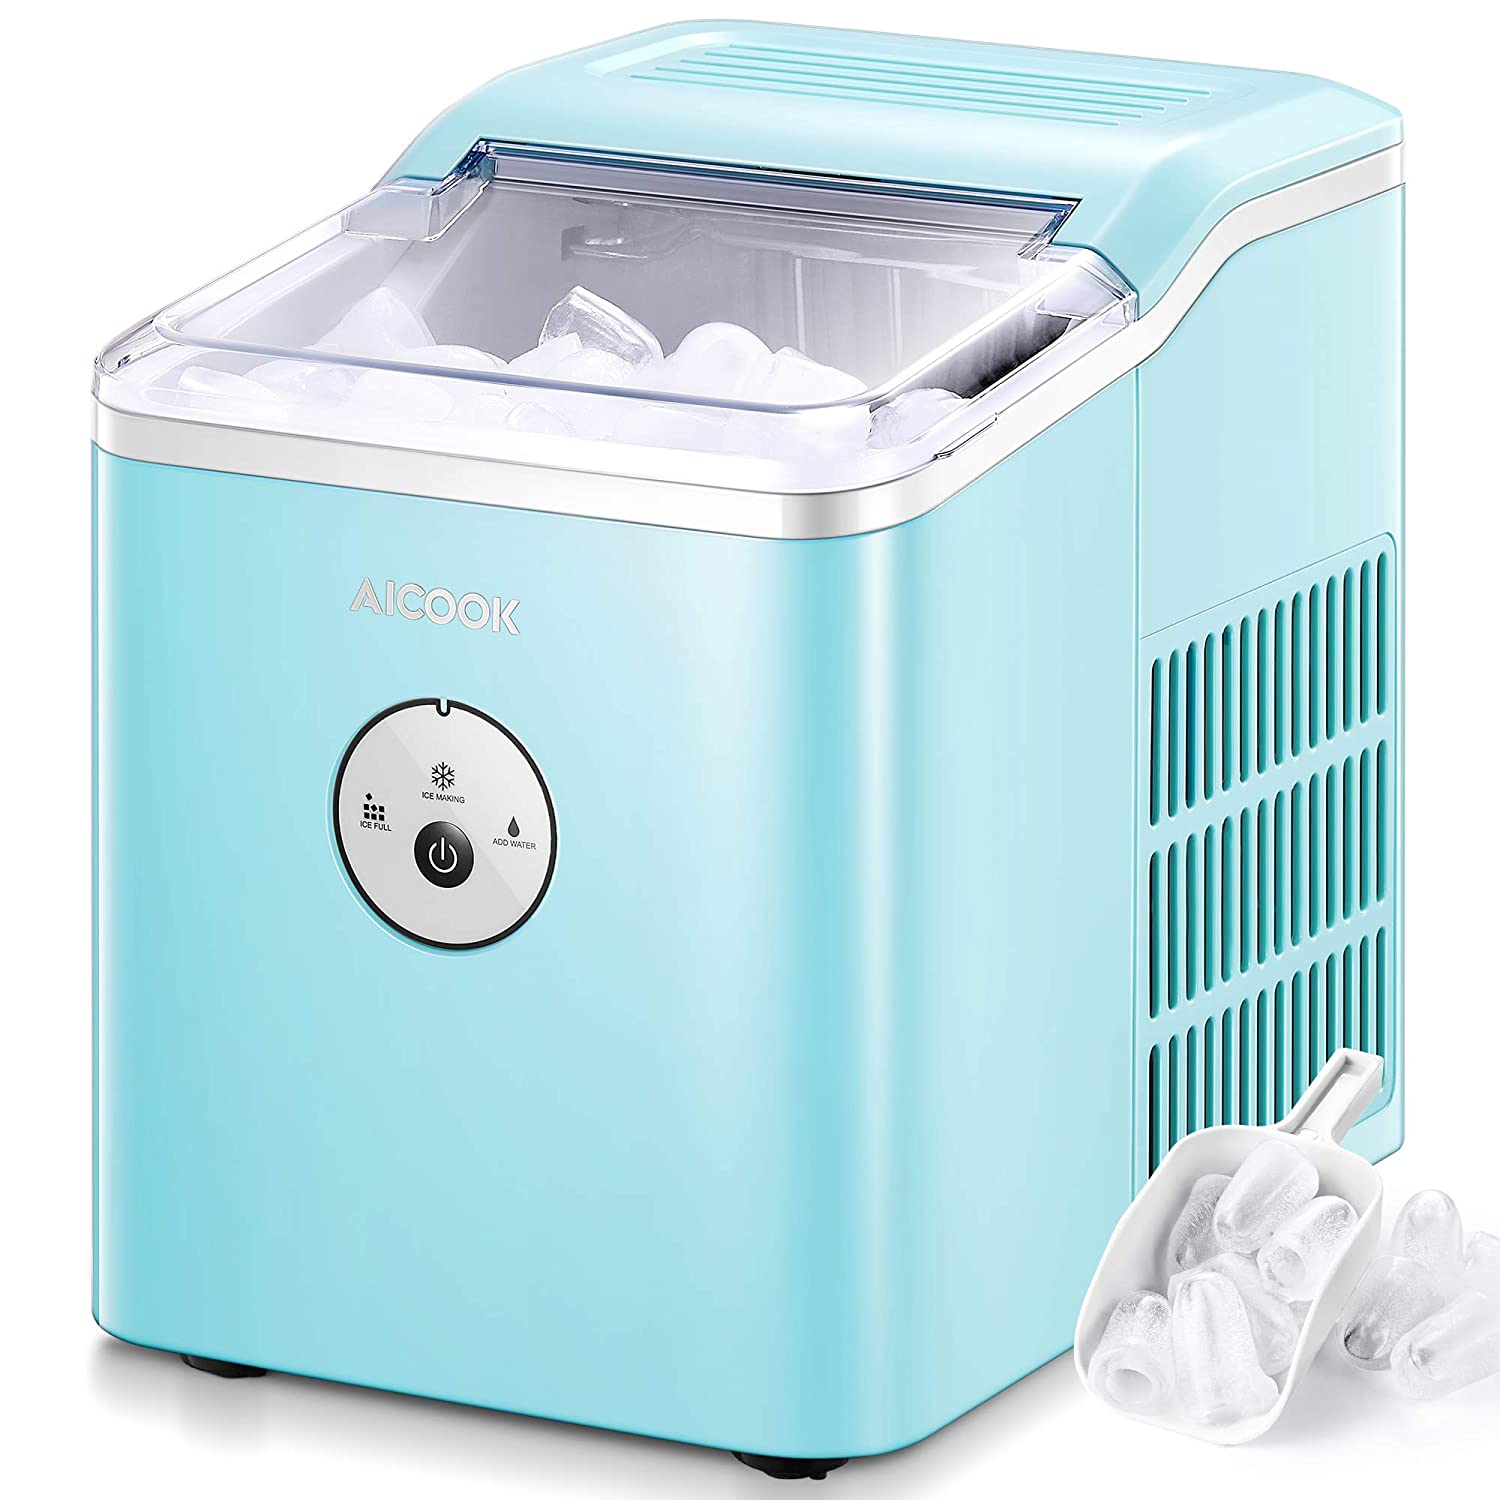 Ice Maker, Countertop, 2 Ice Sizes, 28 lbs Bullet Ice in 24H, Self-Clean, 9  Cubes in 5 Mins, Fohere